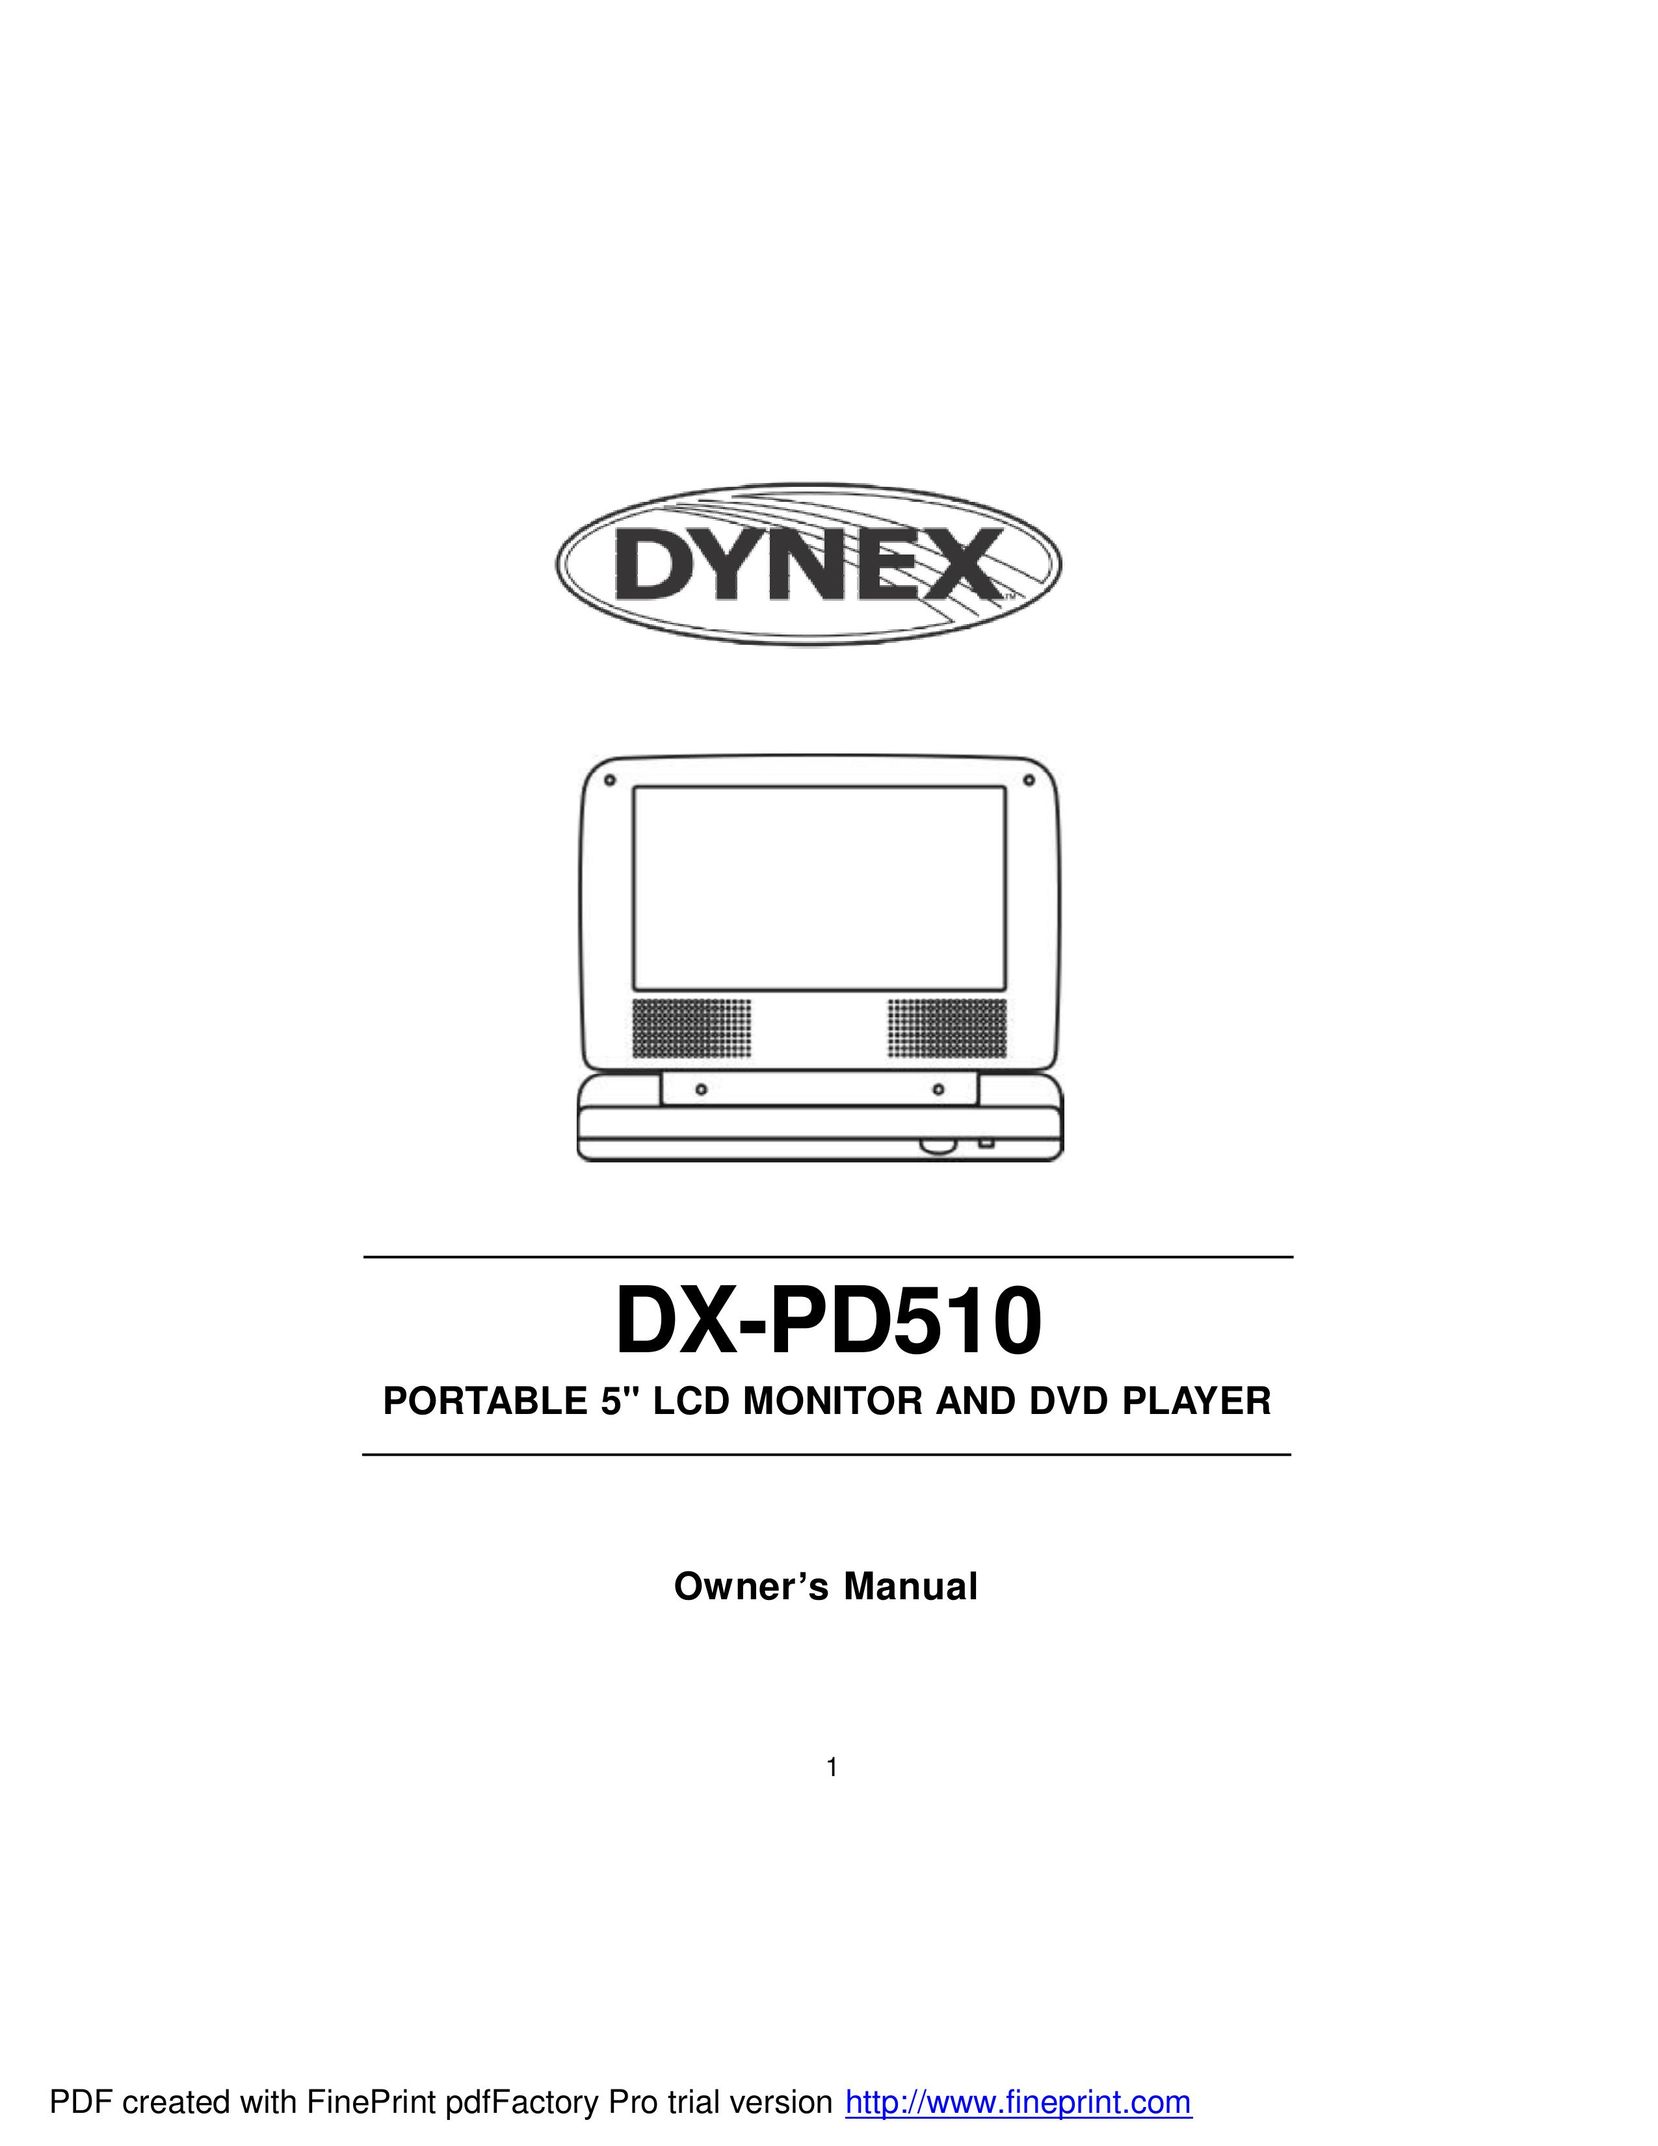 Dynex DX-PD510 TV DVD Combo User Manual (Page 1)